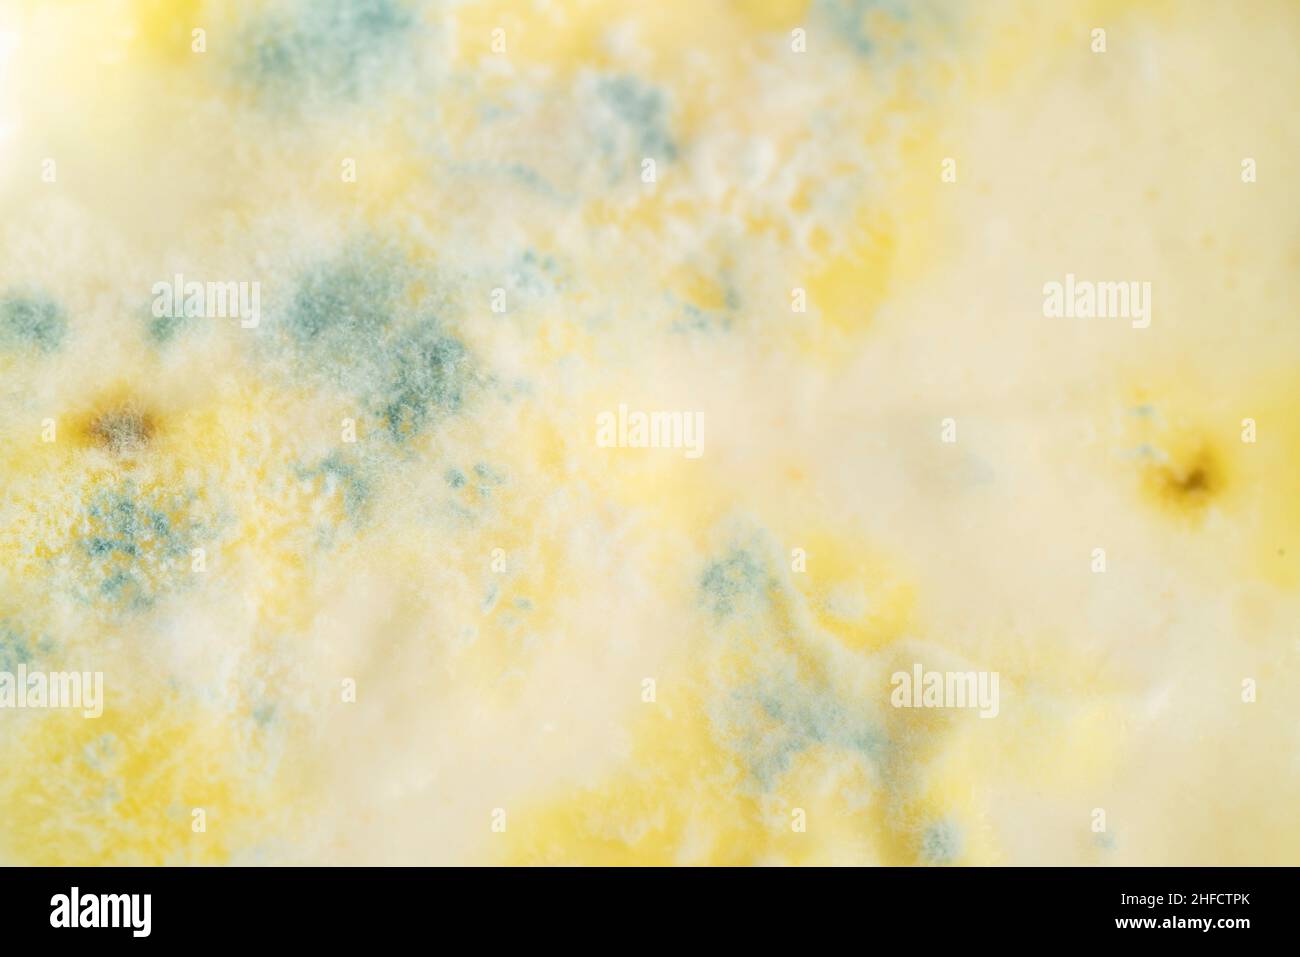 moldy food, growth of mold on yogurt or dairy product food surface exceeded expiry date. rotten food surface Stock Photo